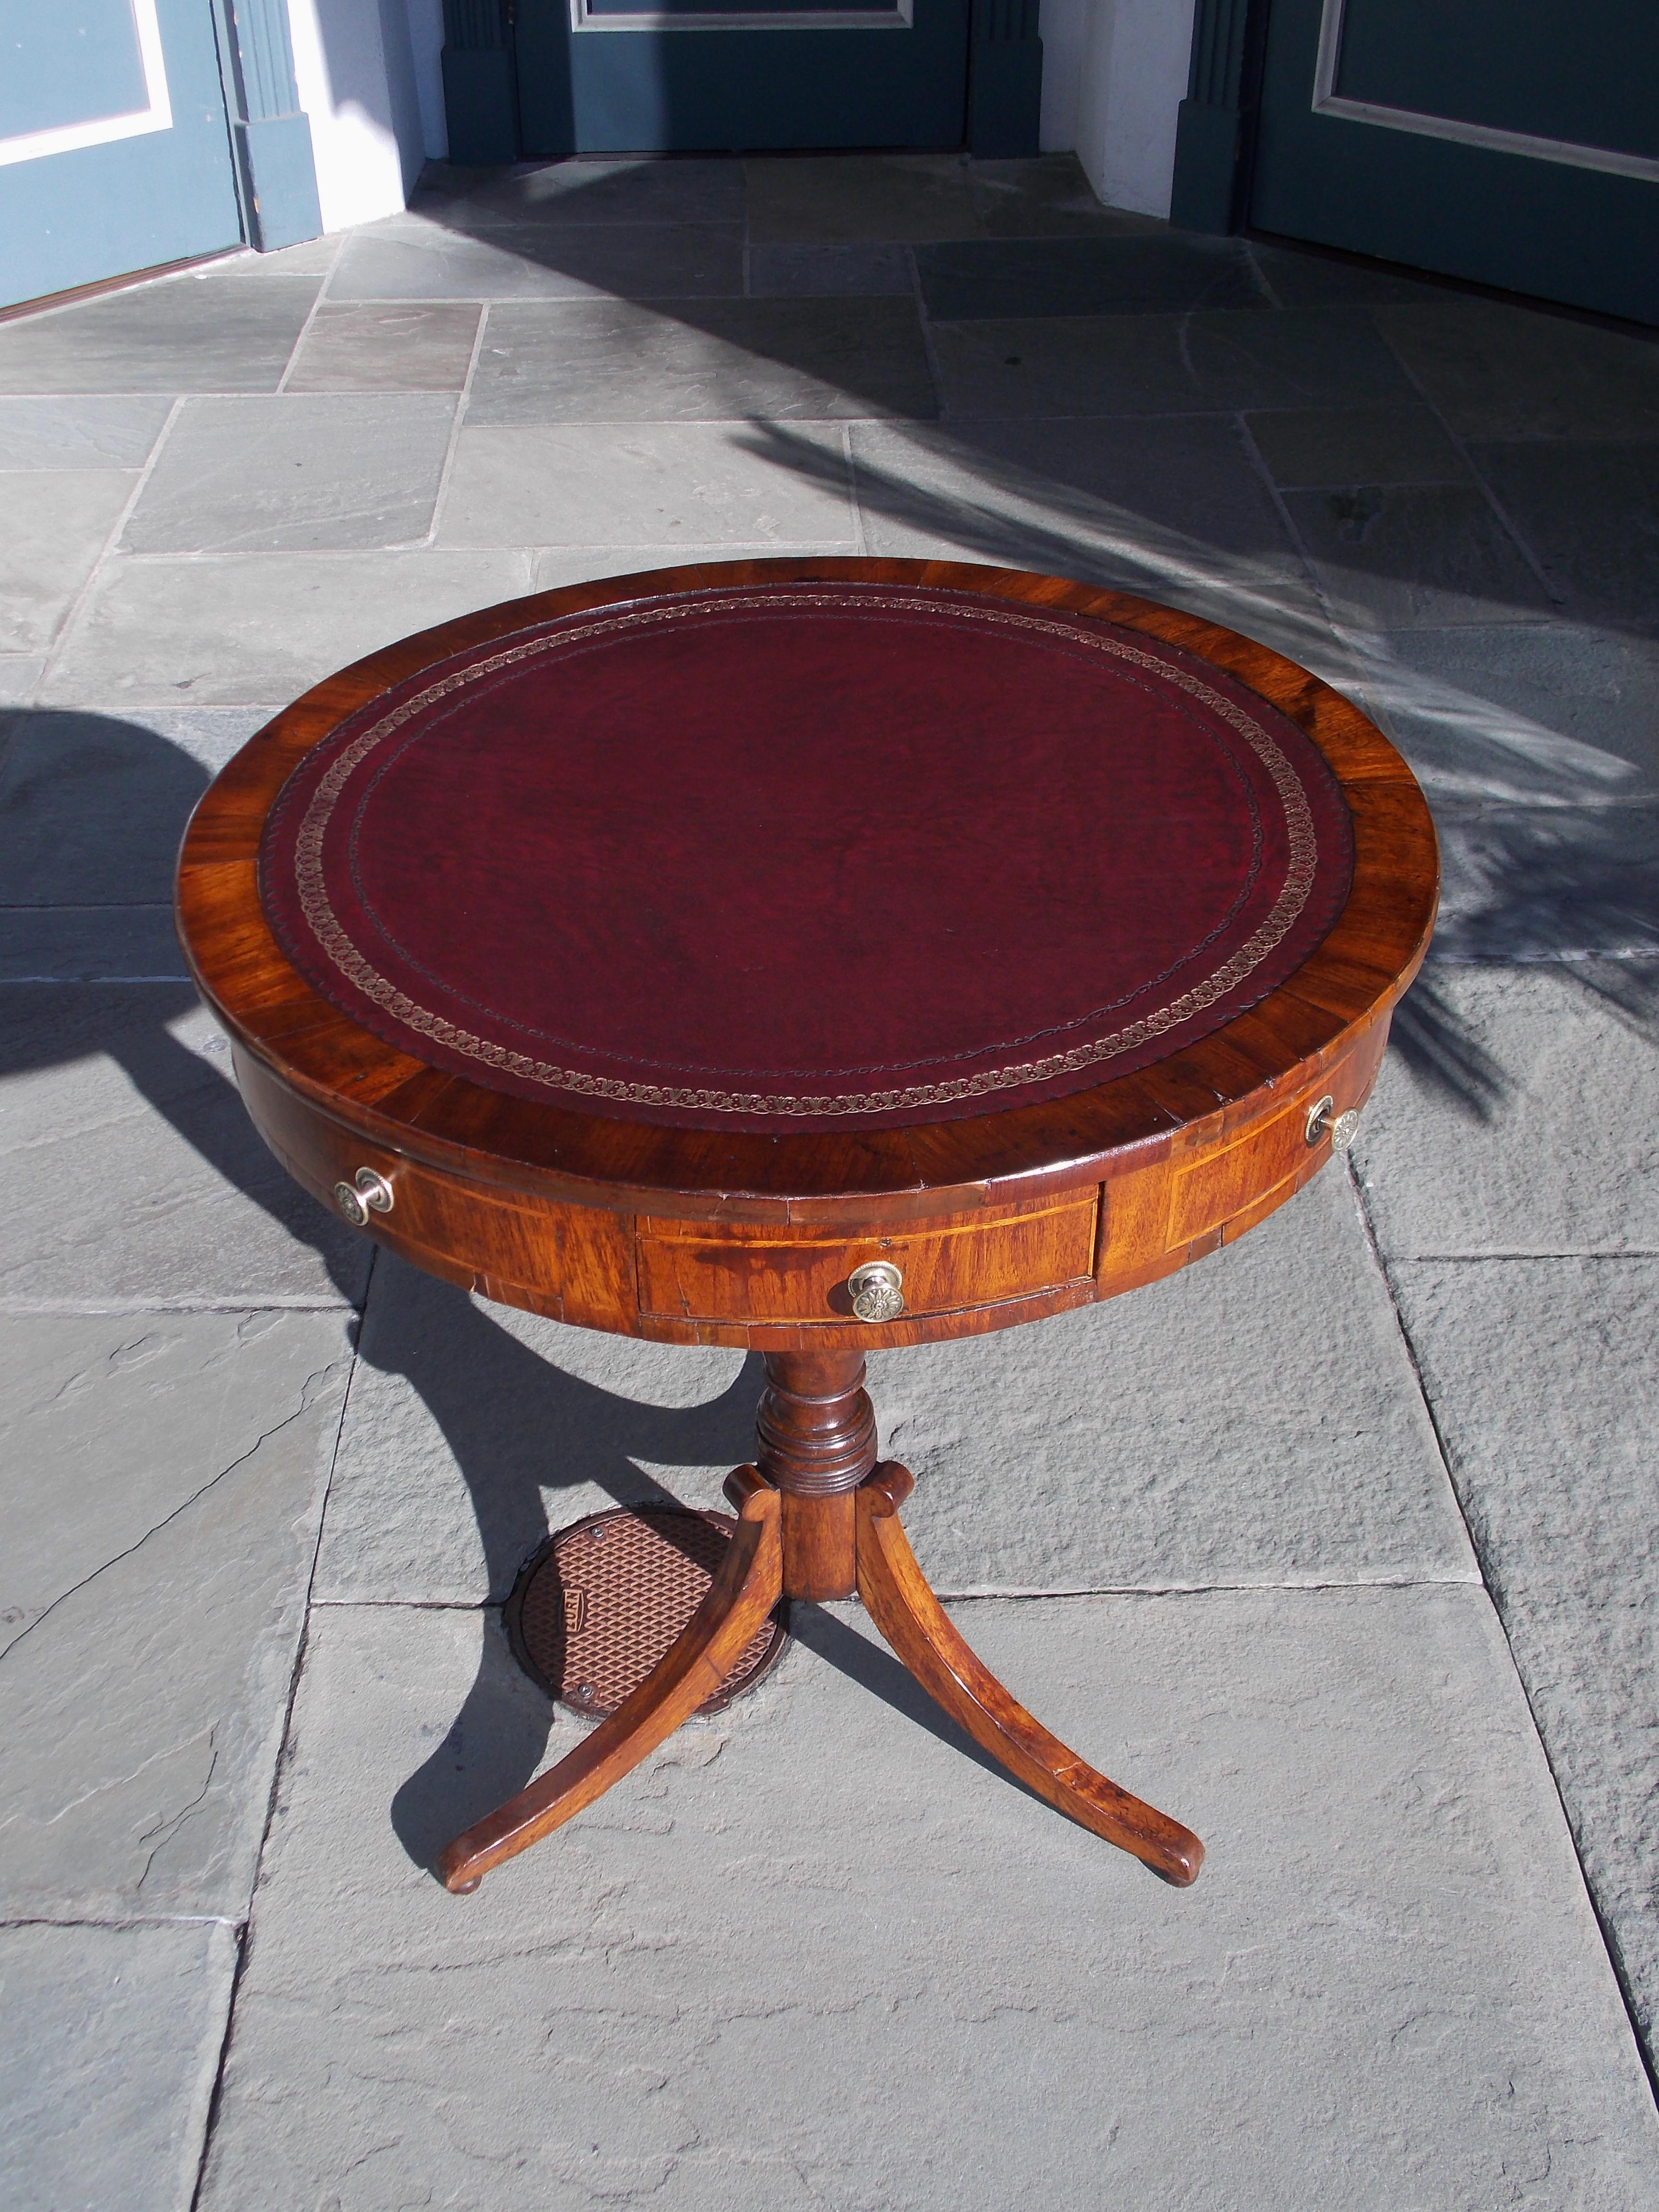 Hand-Carved English Regency Mahogany Satinwood Inlaid Leather Top Drum Table, Circa 1815